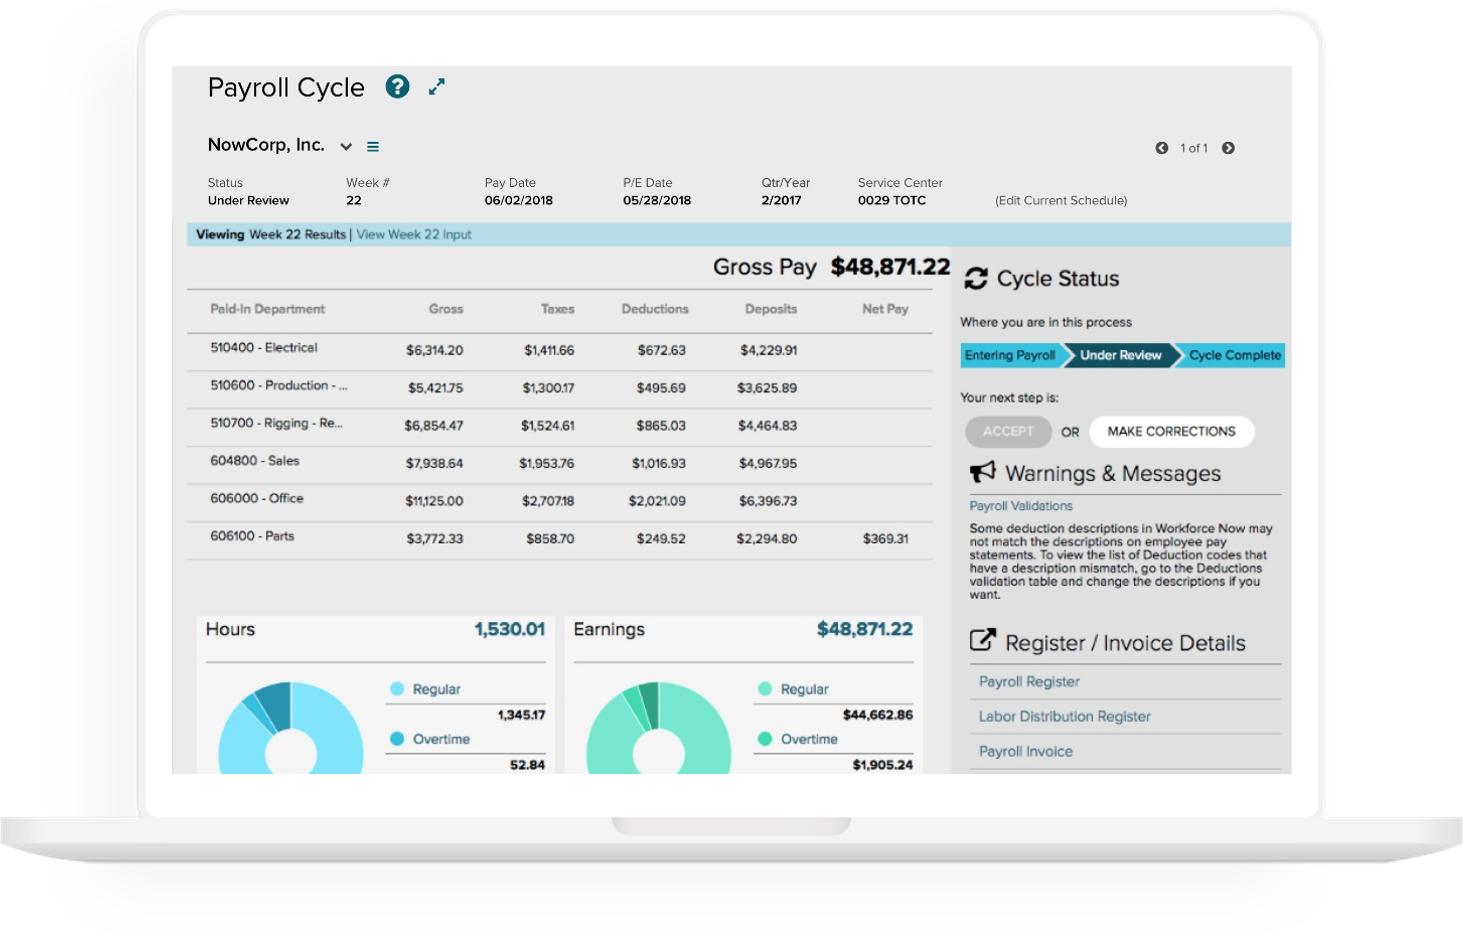 ADP TotalSource Software - Payroll Cycle